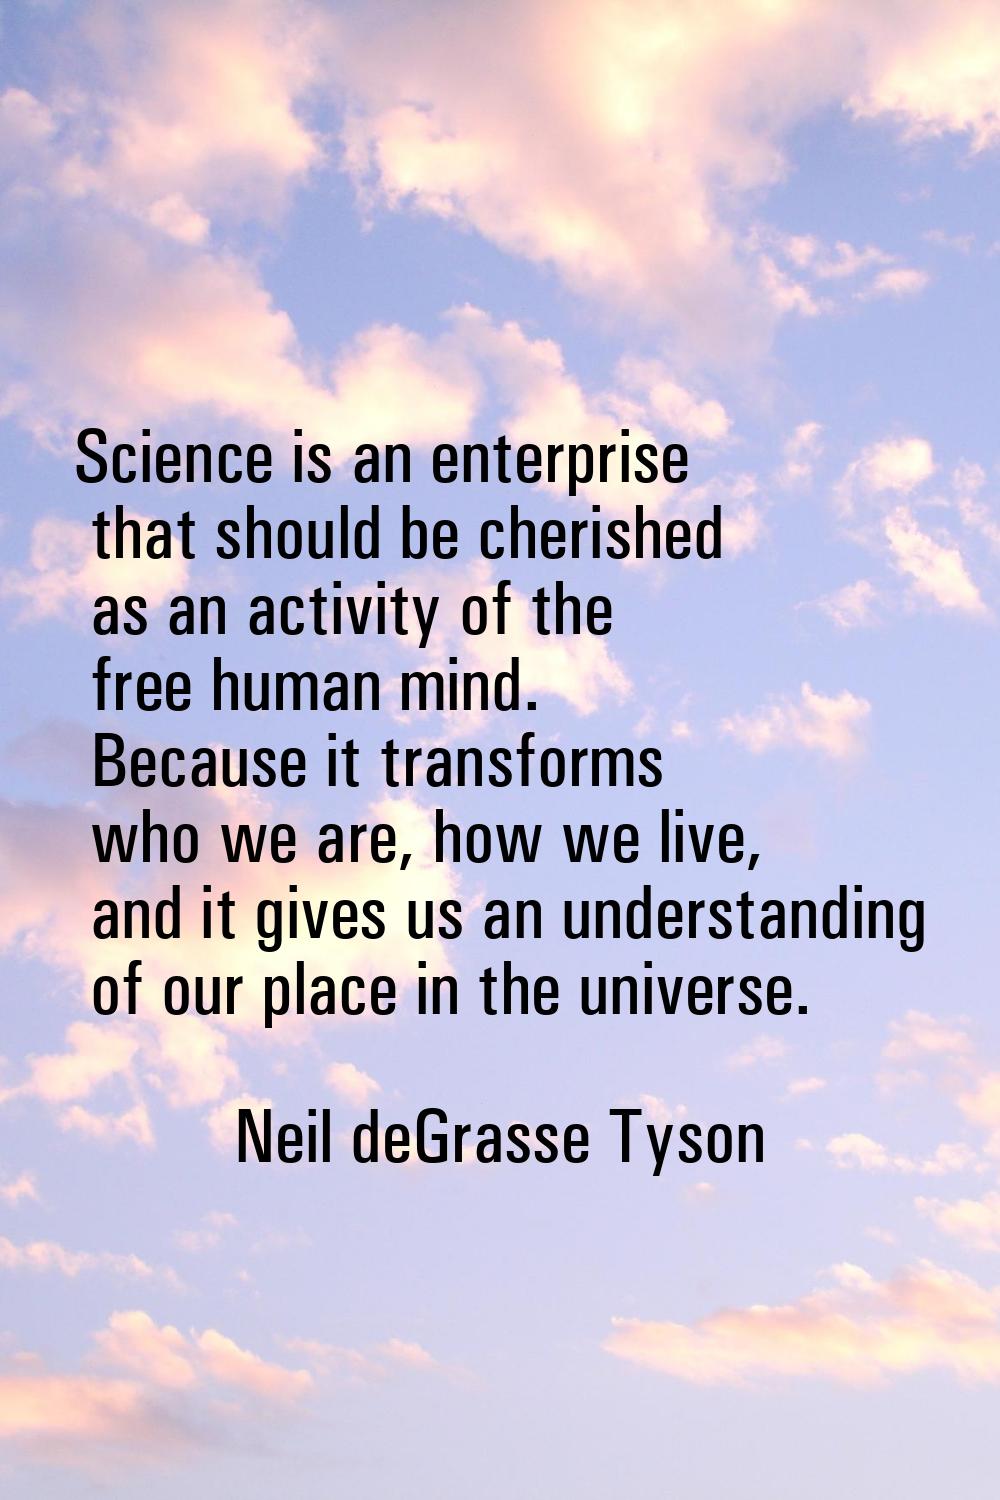 Science is an enterprise that should be cherished as an activity of the free human mind. Because it